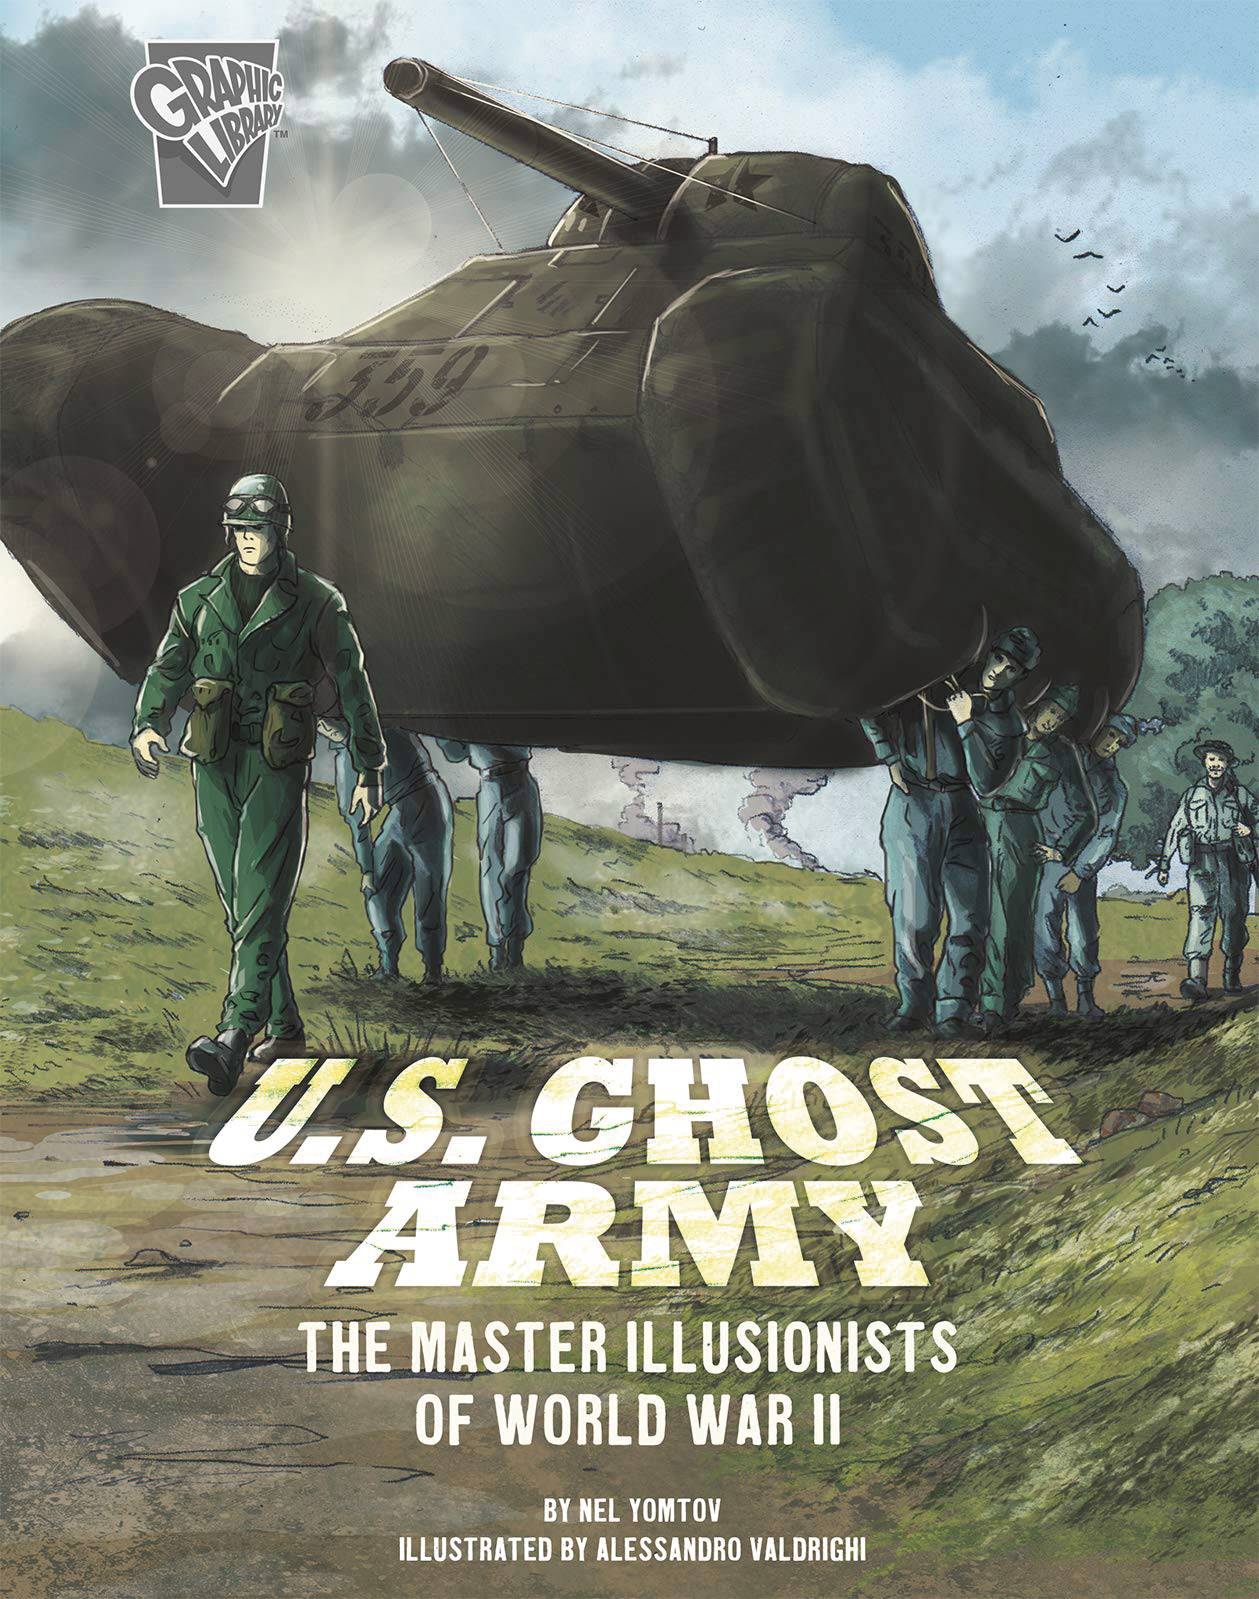 Amazing World War II Stories Graphic Novel #4 Us Ghost Army